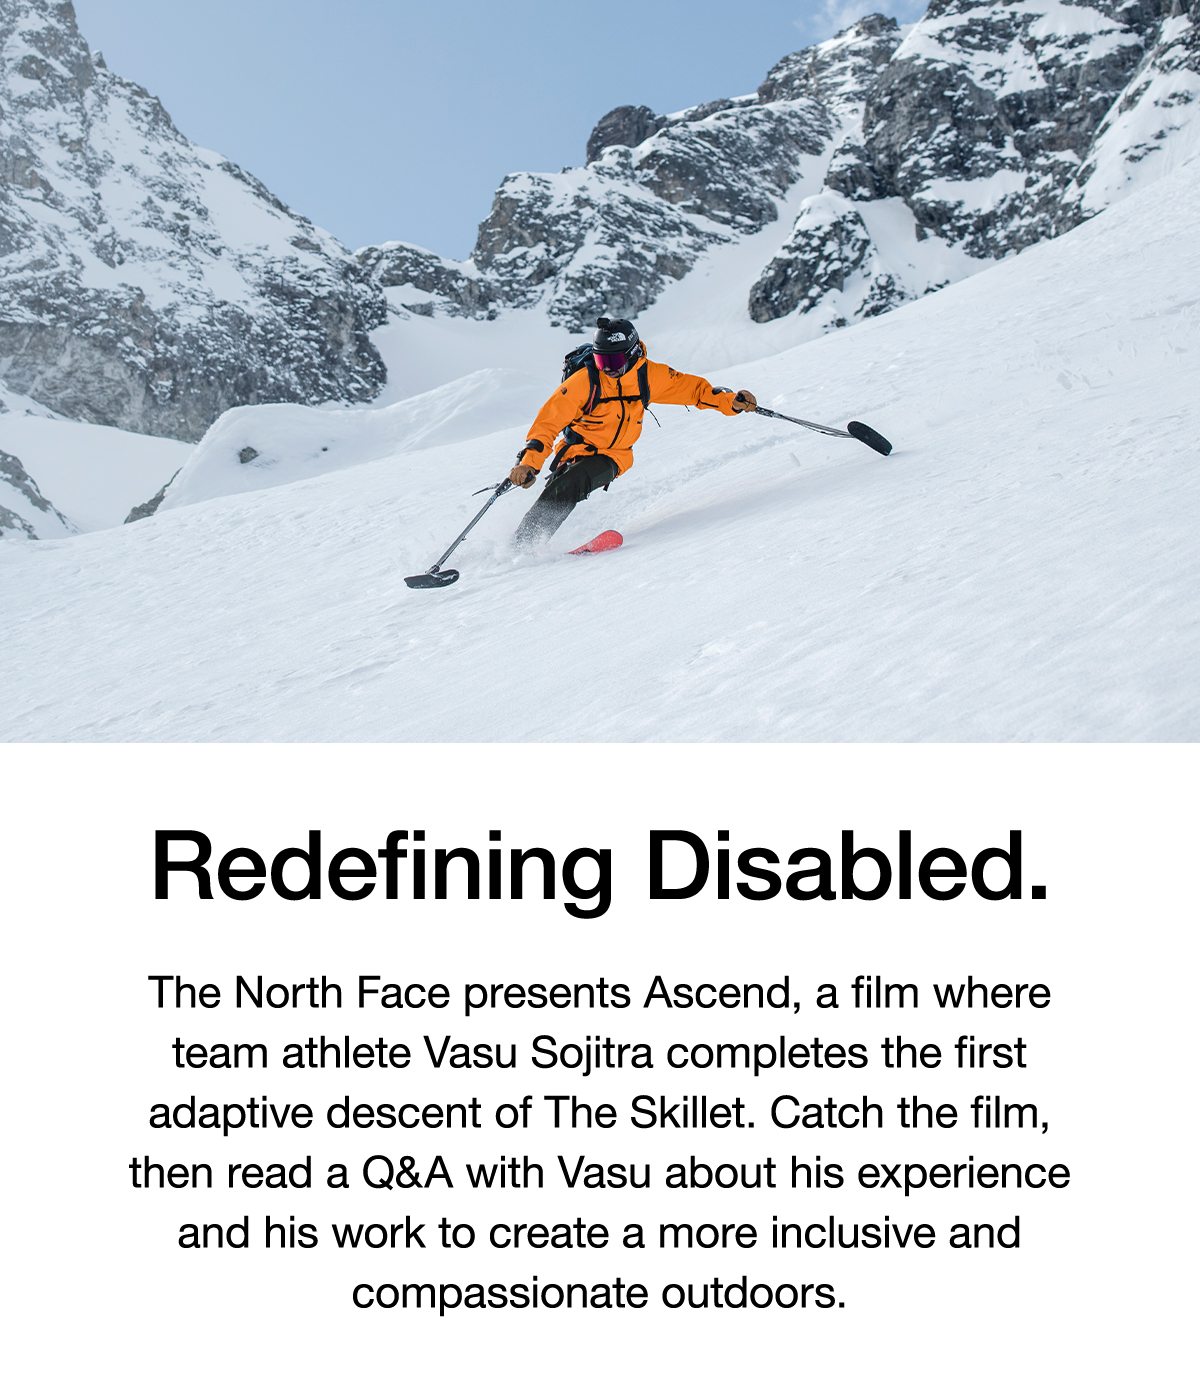 Redefining Disabled. The North Face presents Ascend, a film where team athlete Vasu Sojitra completes the first adaptive descent of The Skillet. Catch the film, then read a Q&A with Vasu about his experience and his work to create a more inclusive and compassionate outdoors.